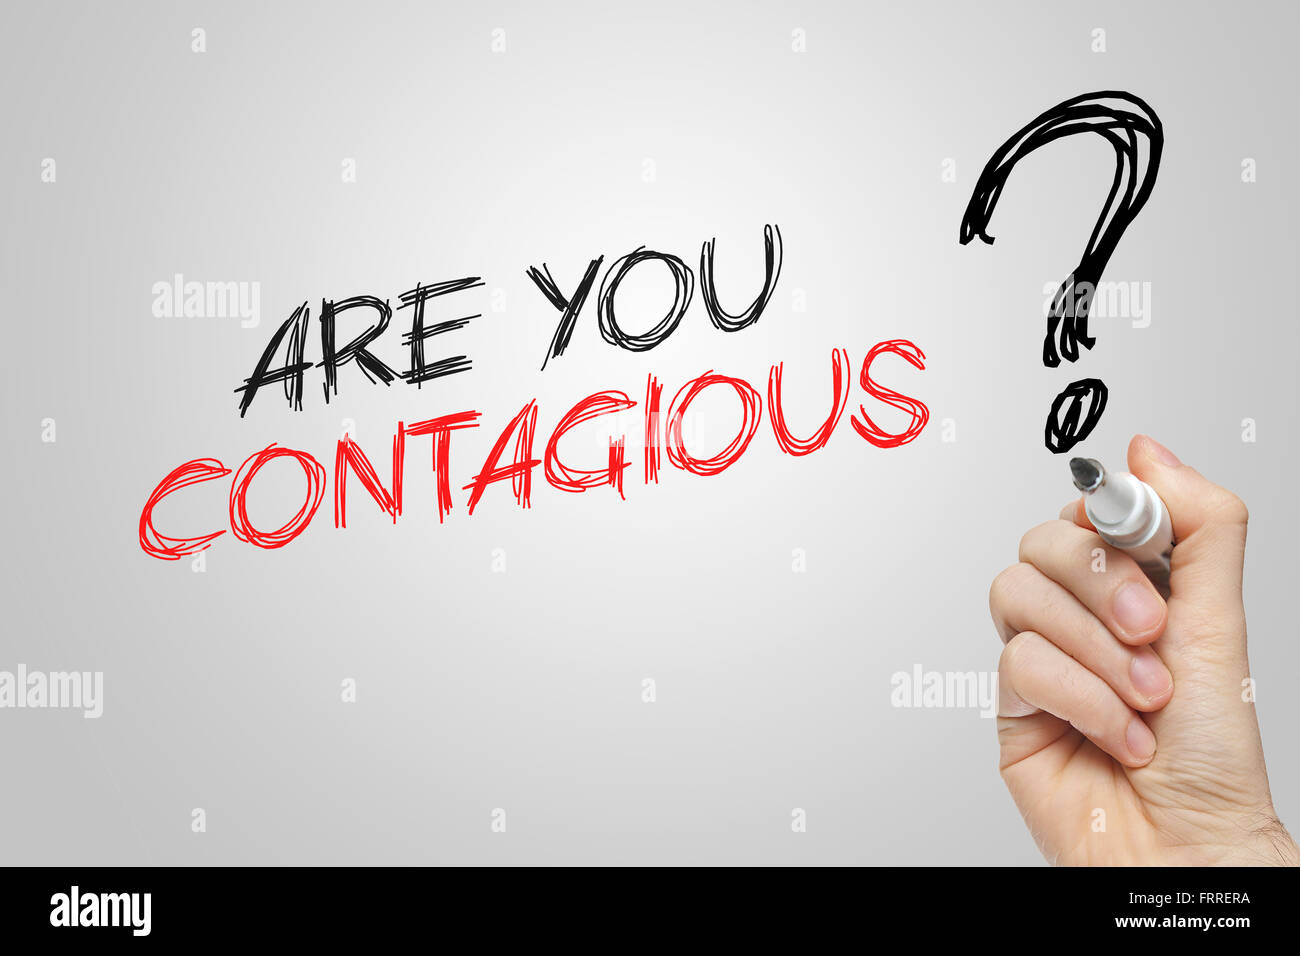 Hand writing are you contagious on grey background Stock Photo